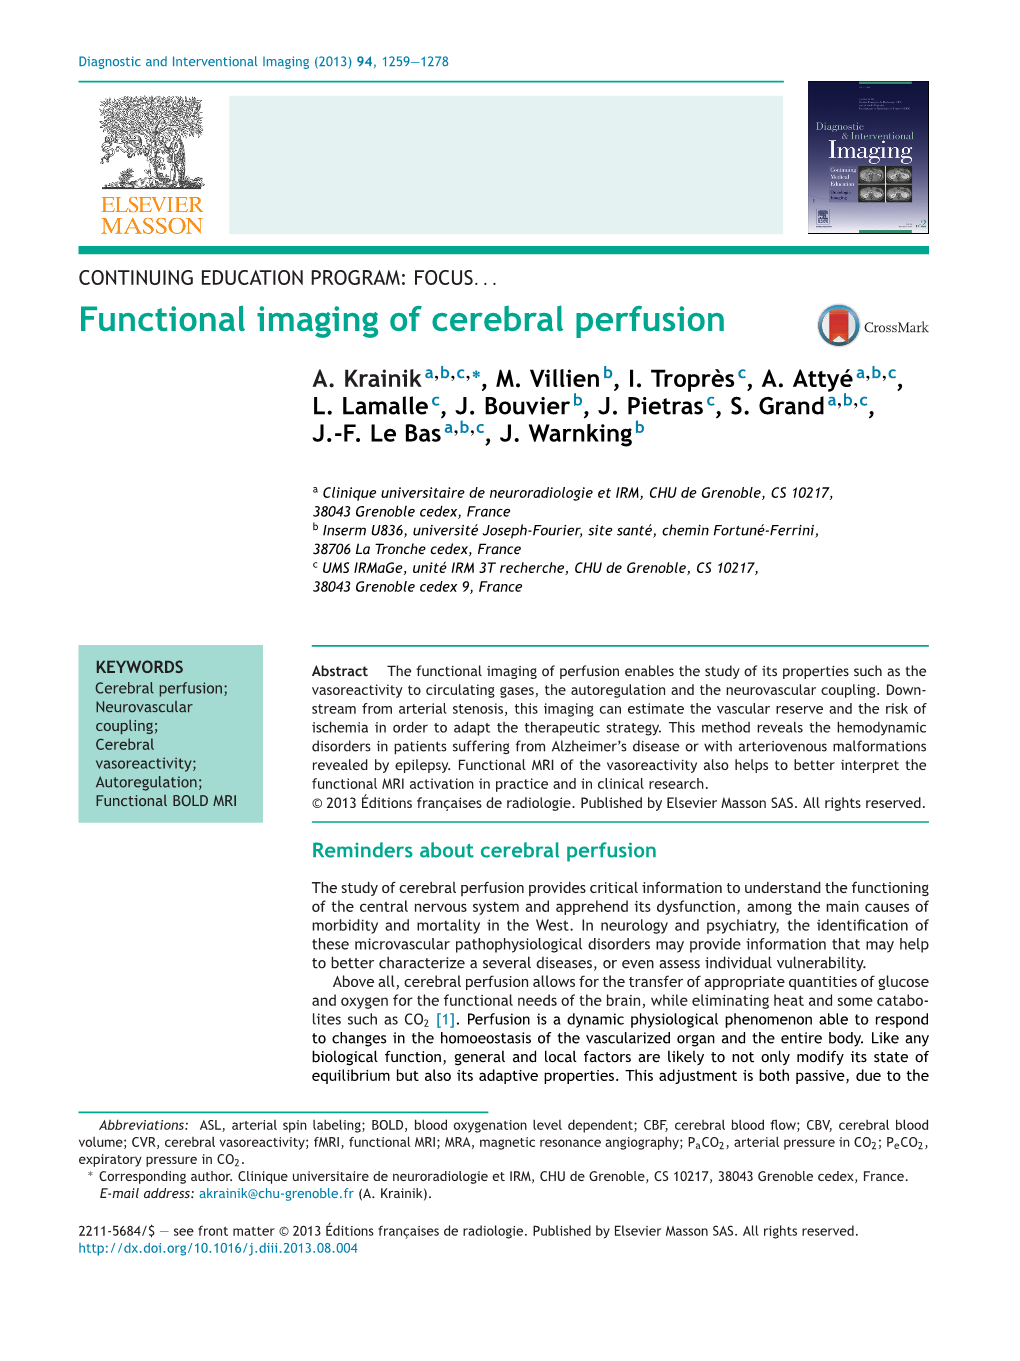 Functional Imaging of Cerebral Perfusion